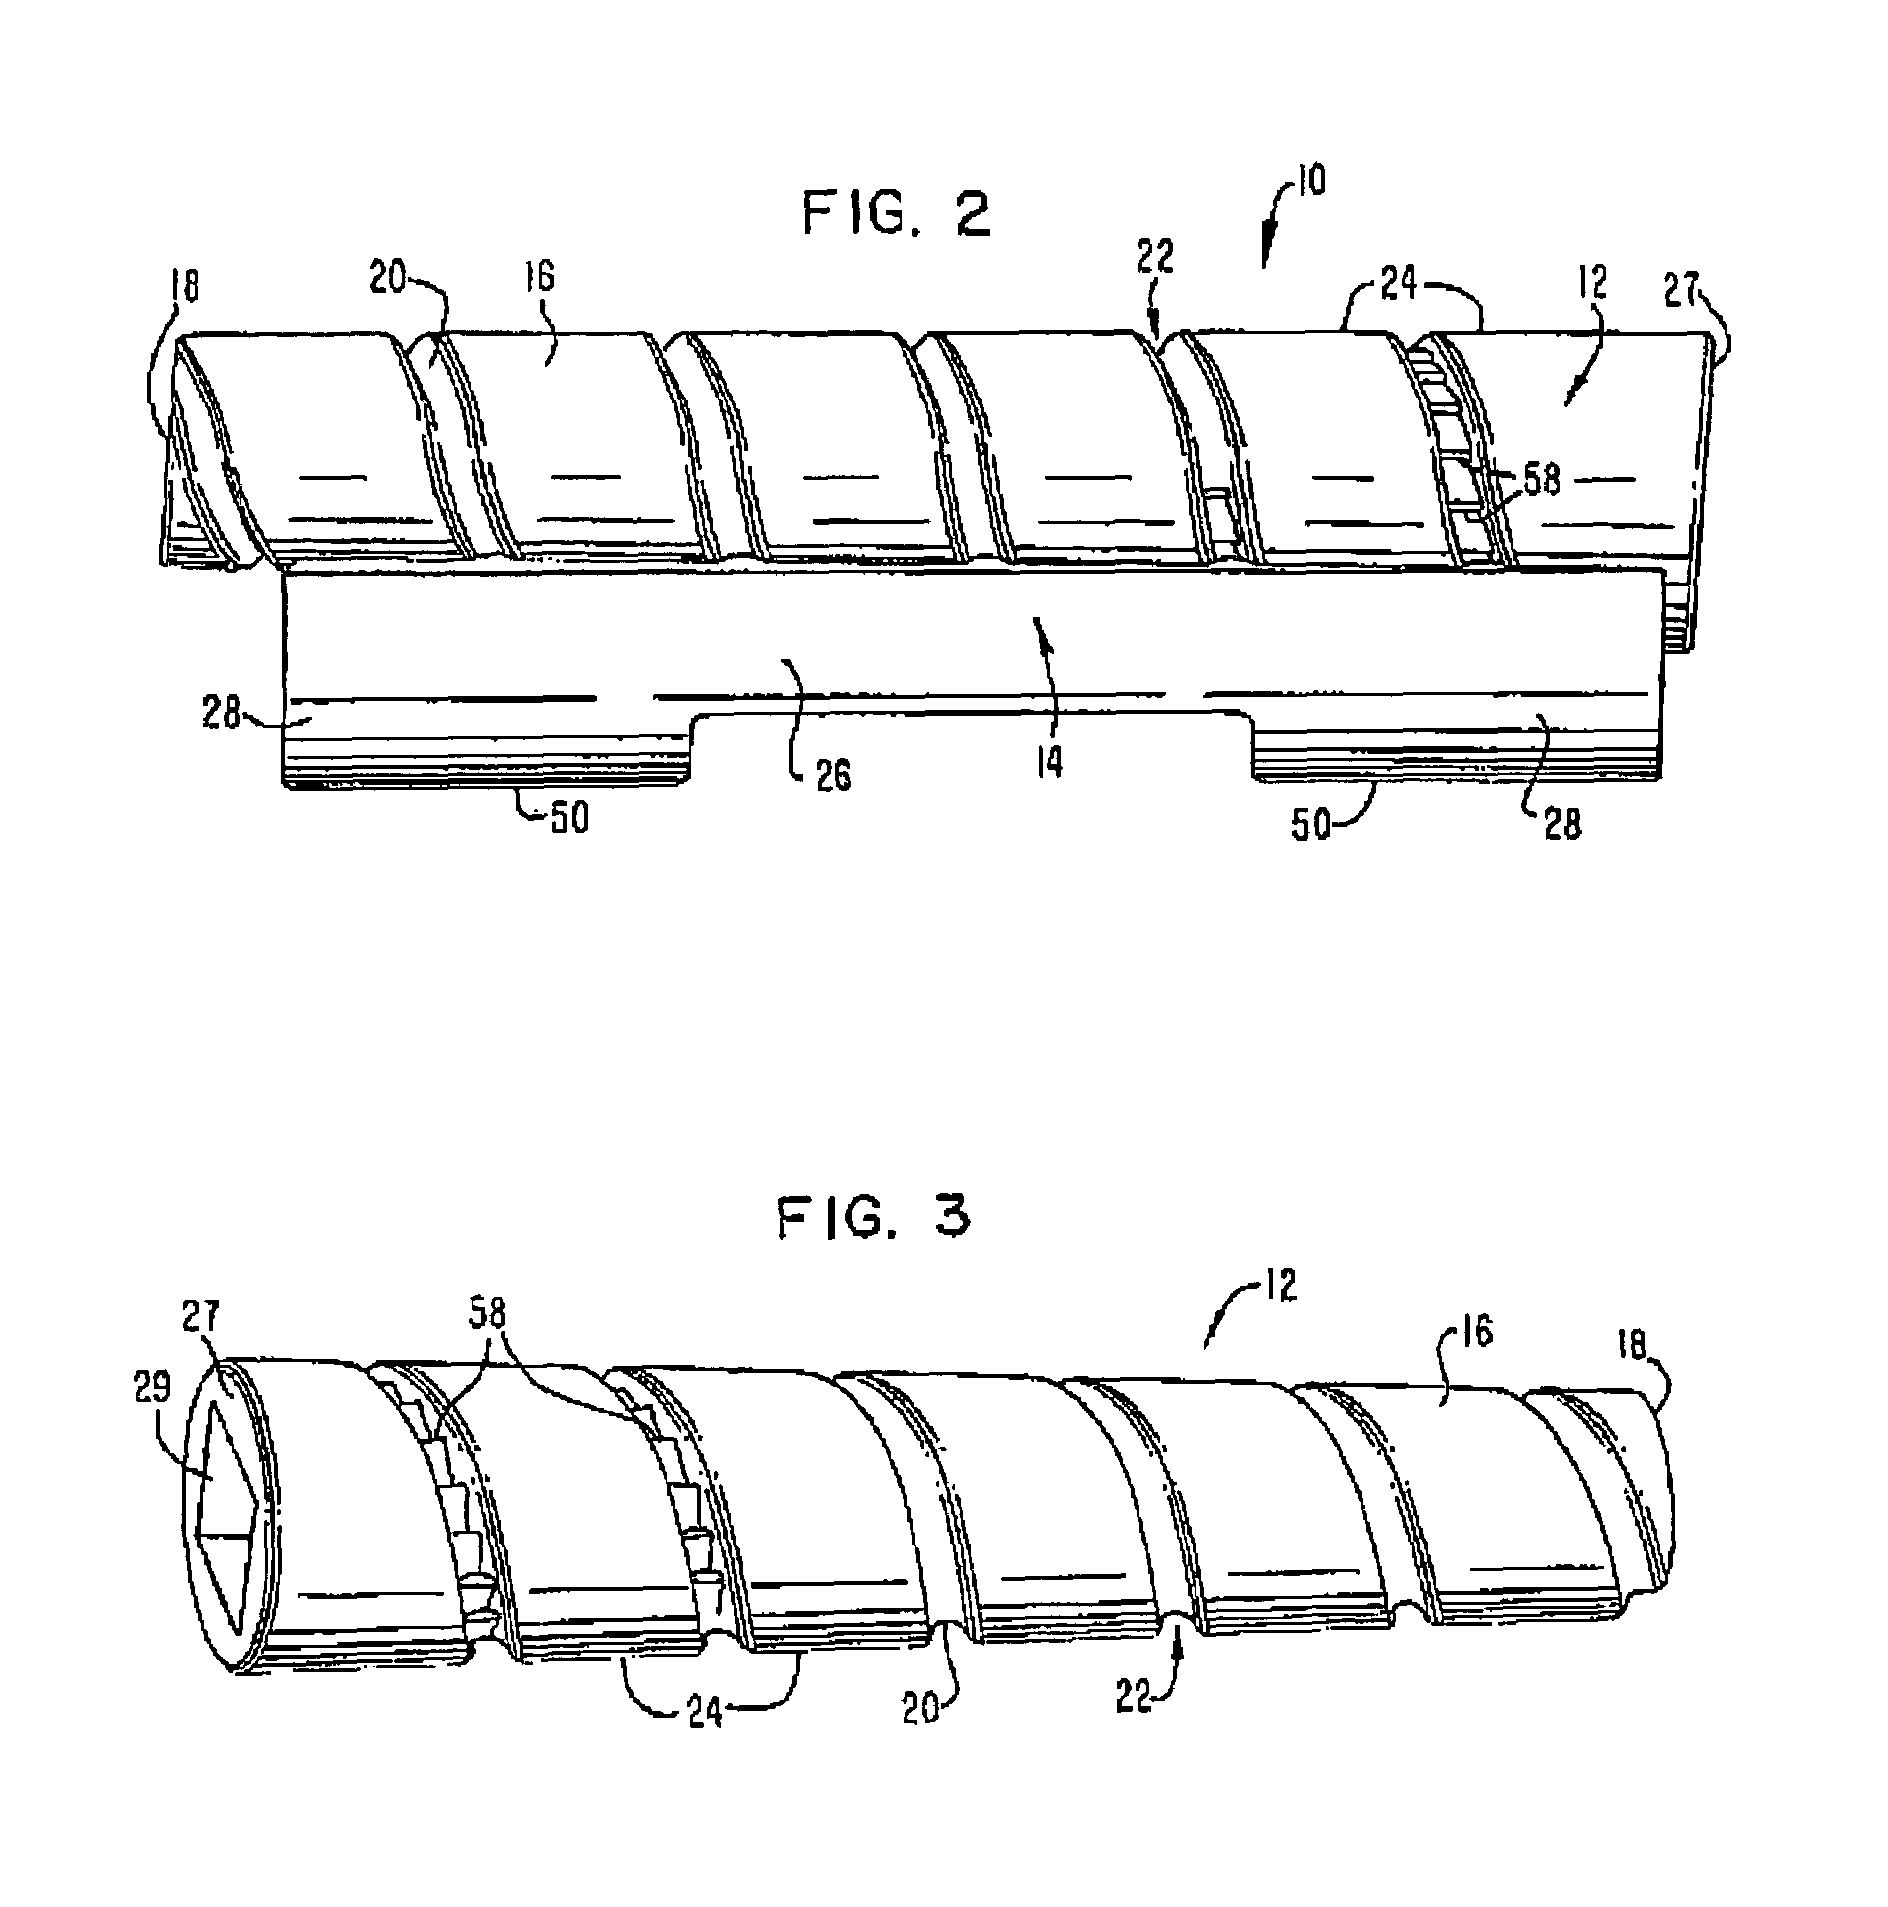 Releasable coupling assembly